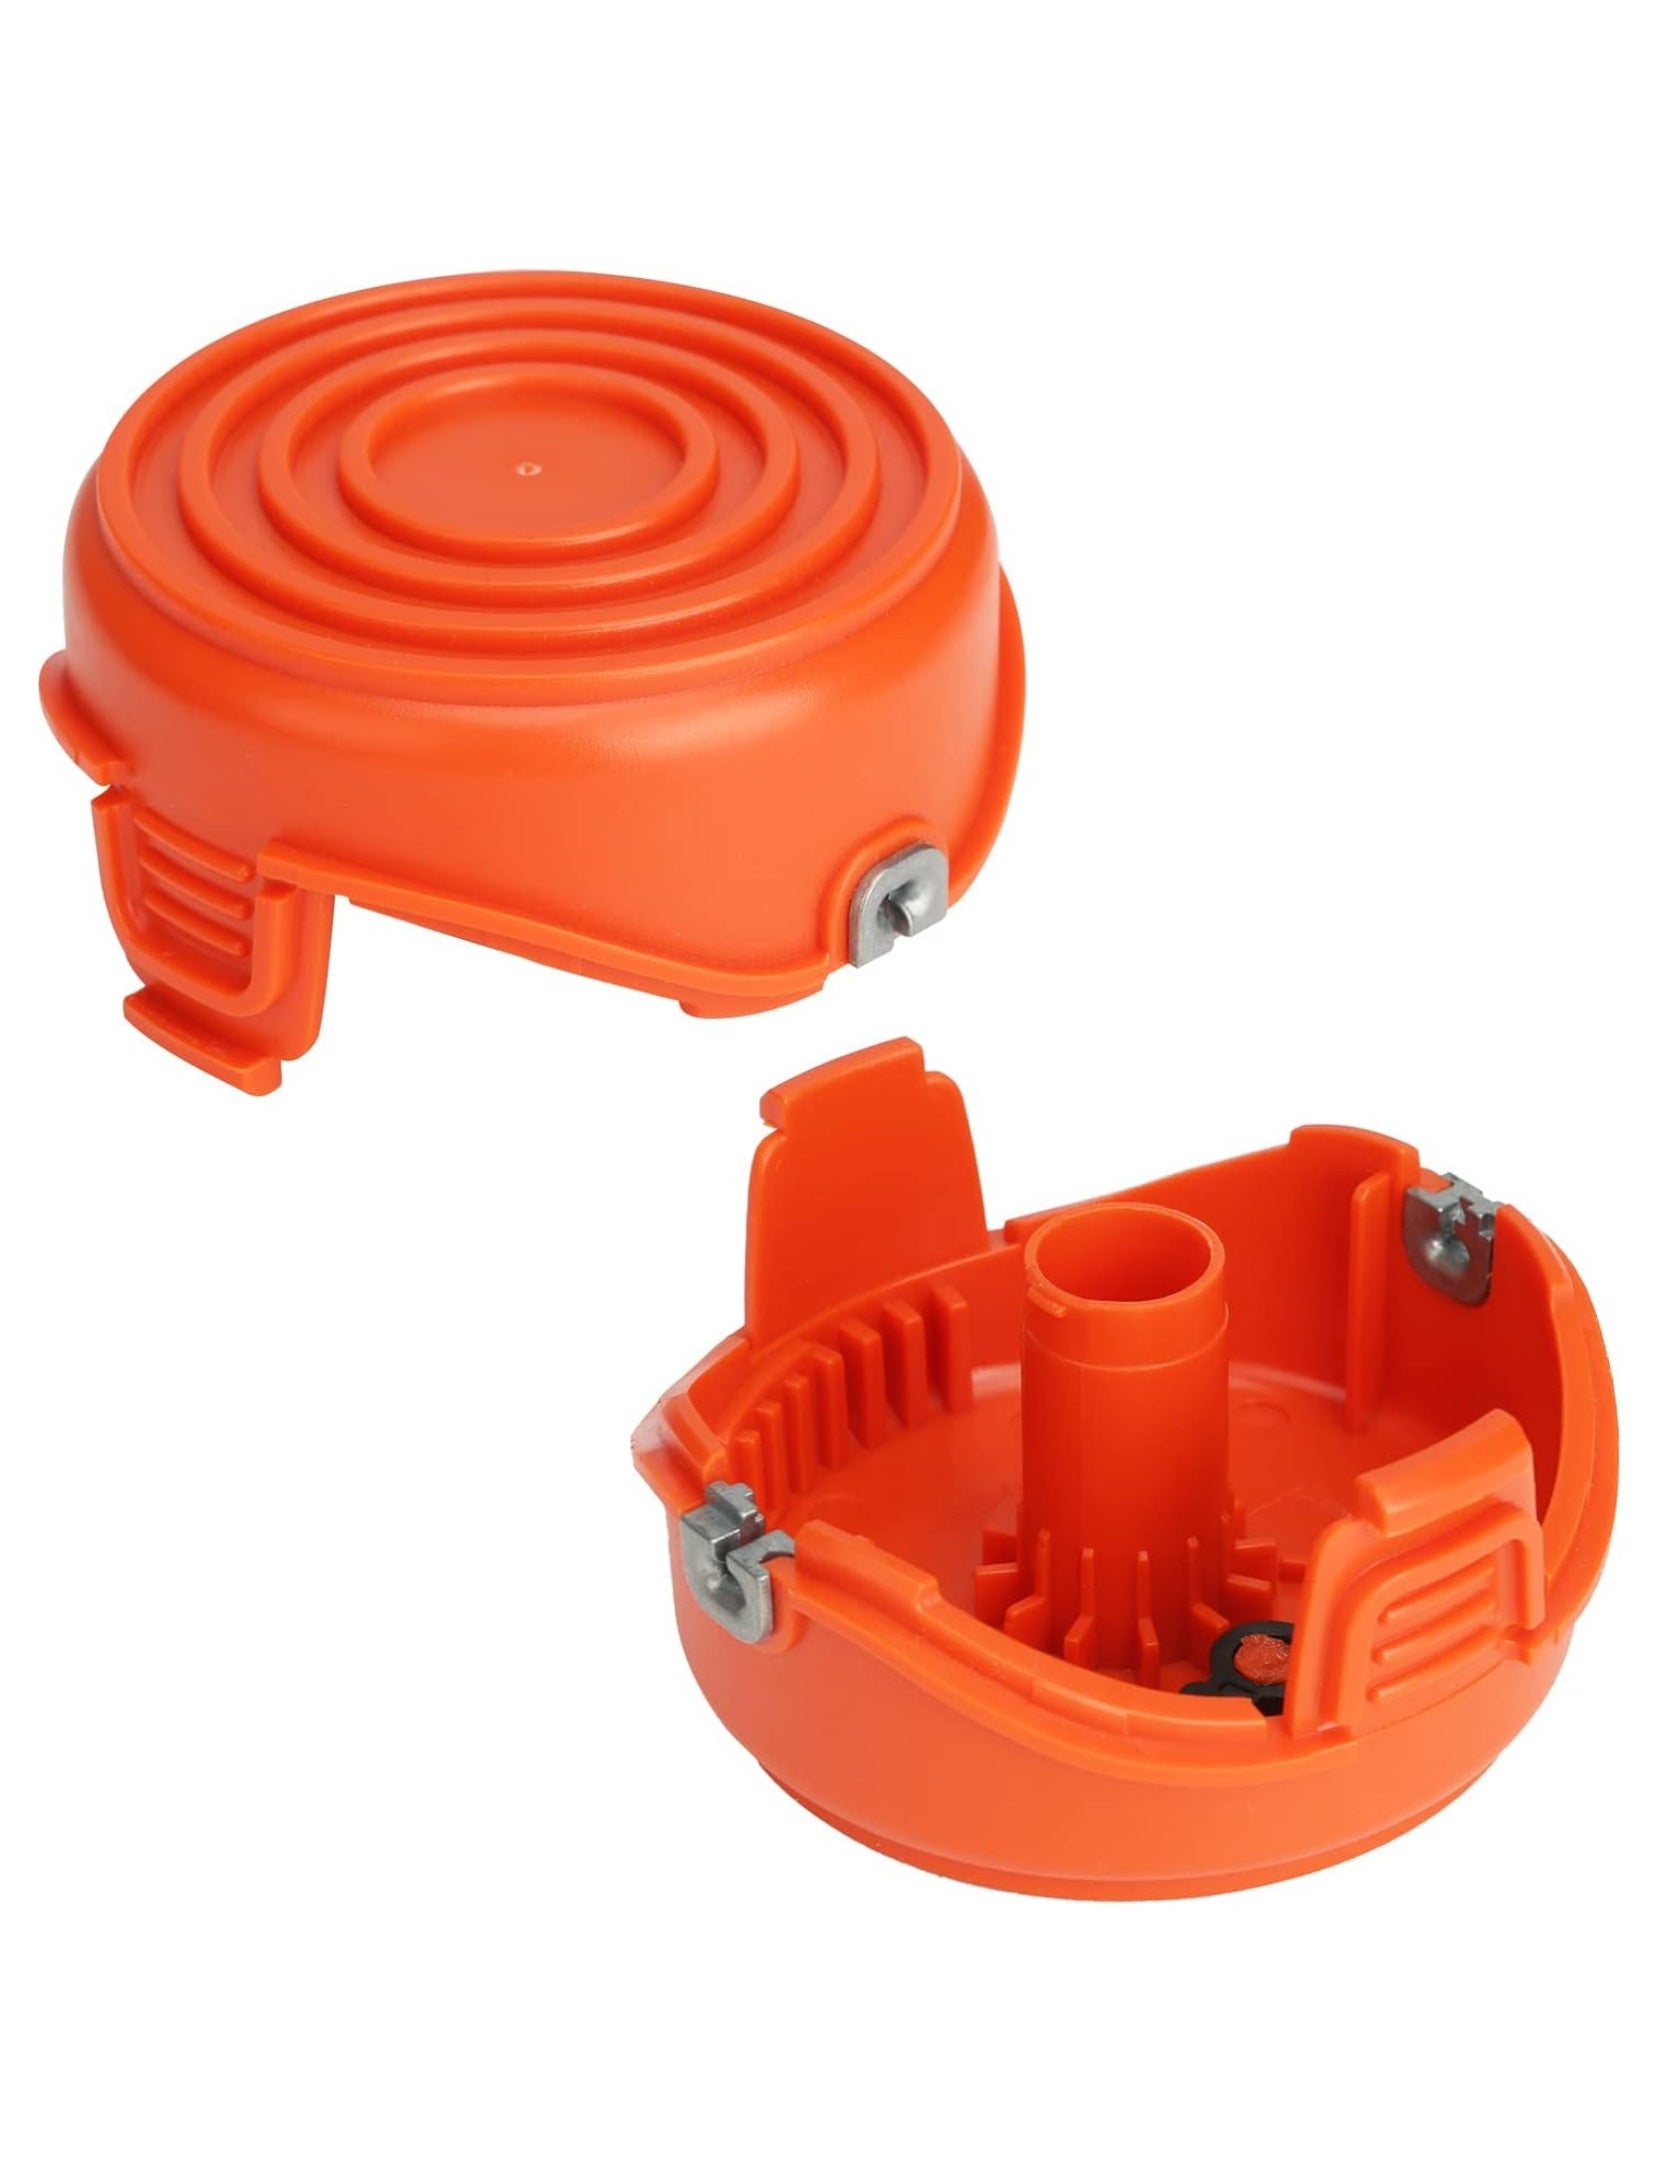 THTEN RC-065-P 90517175 Spool Cover Cap Compatible with Black and Decker GH710 GH700 GH750 RC-065, DF-065-BKP Weed Eater Refills